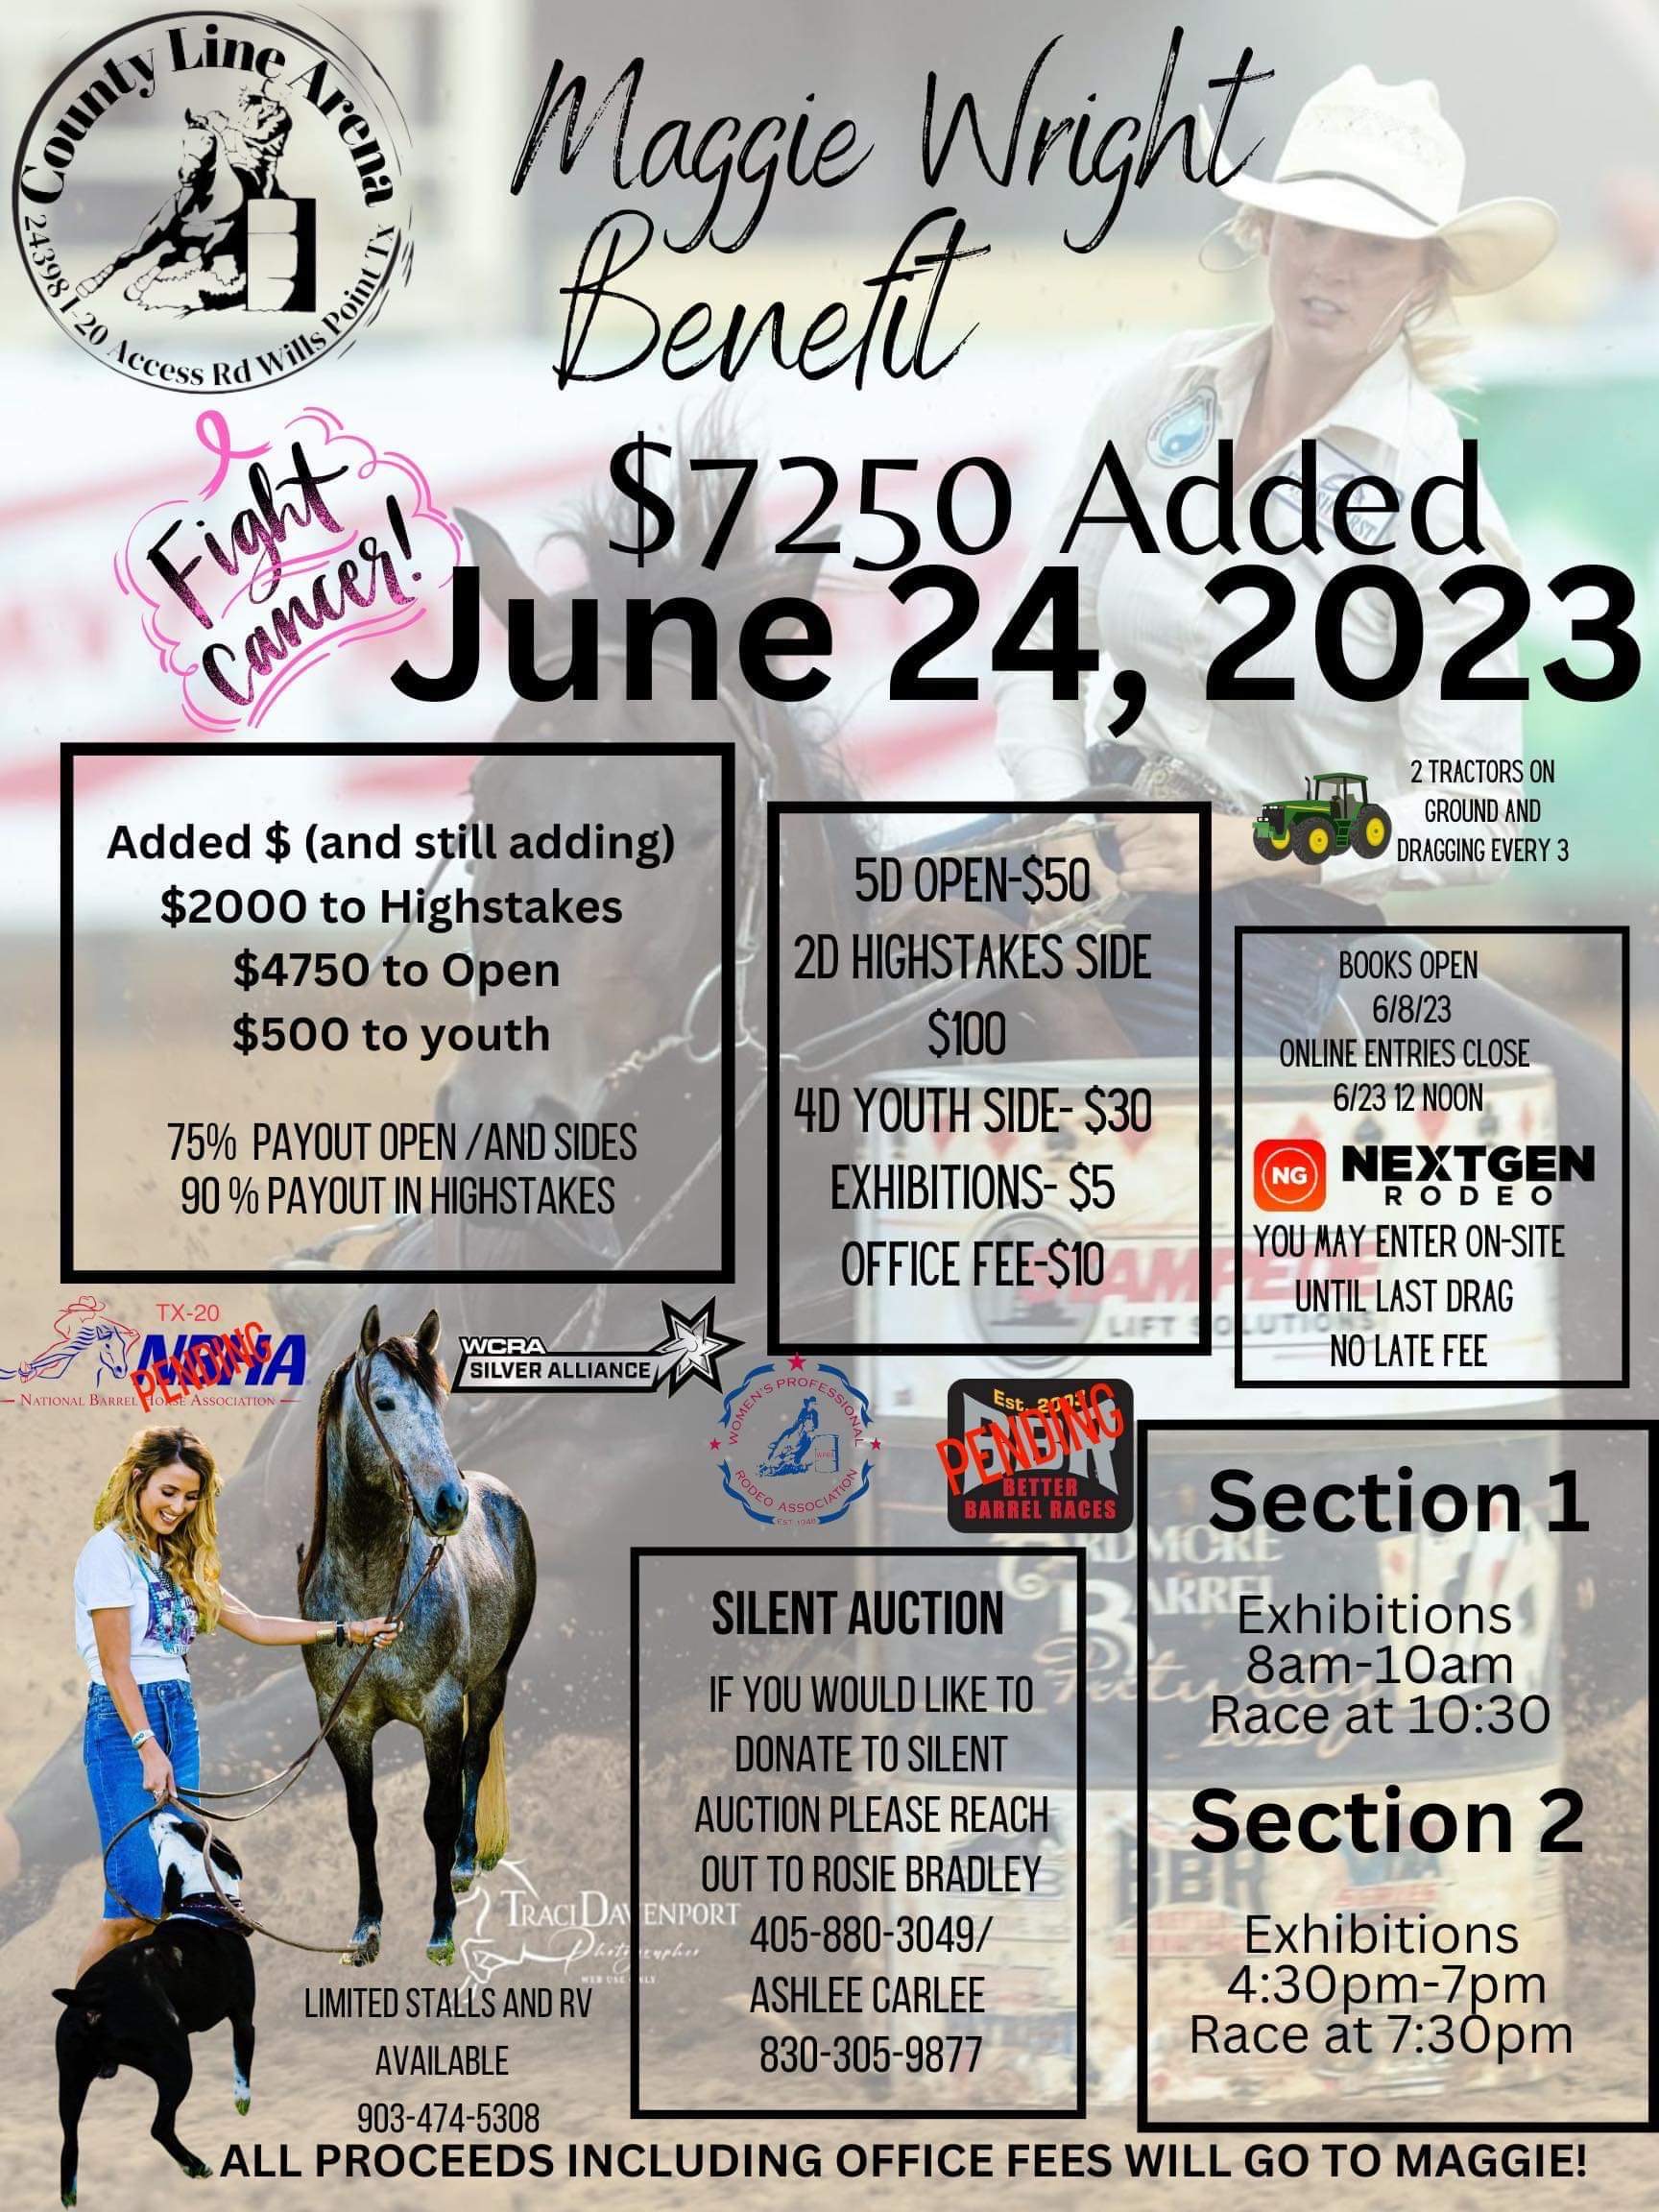 Maggie Wright Benefit Race and Silent Auction